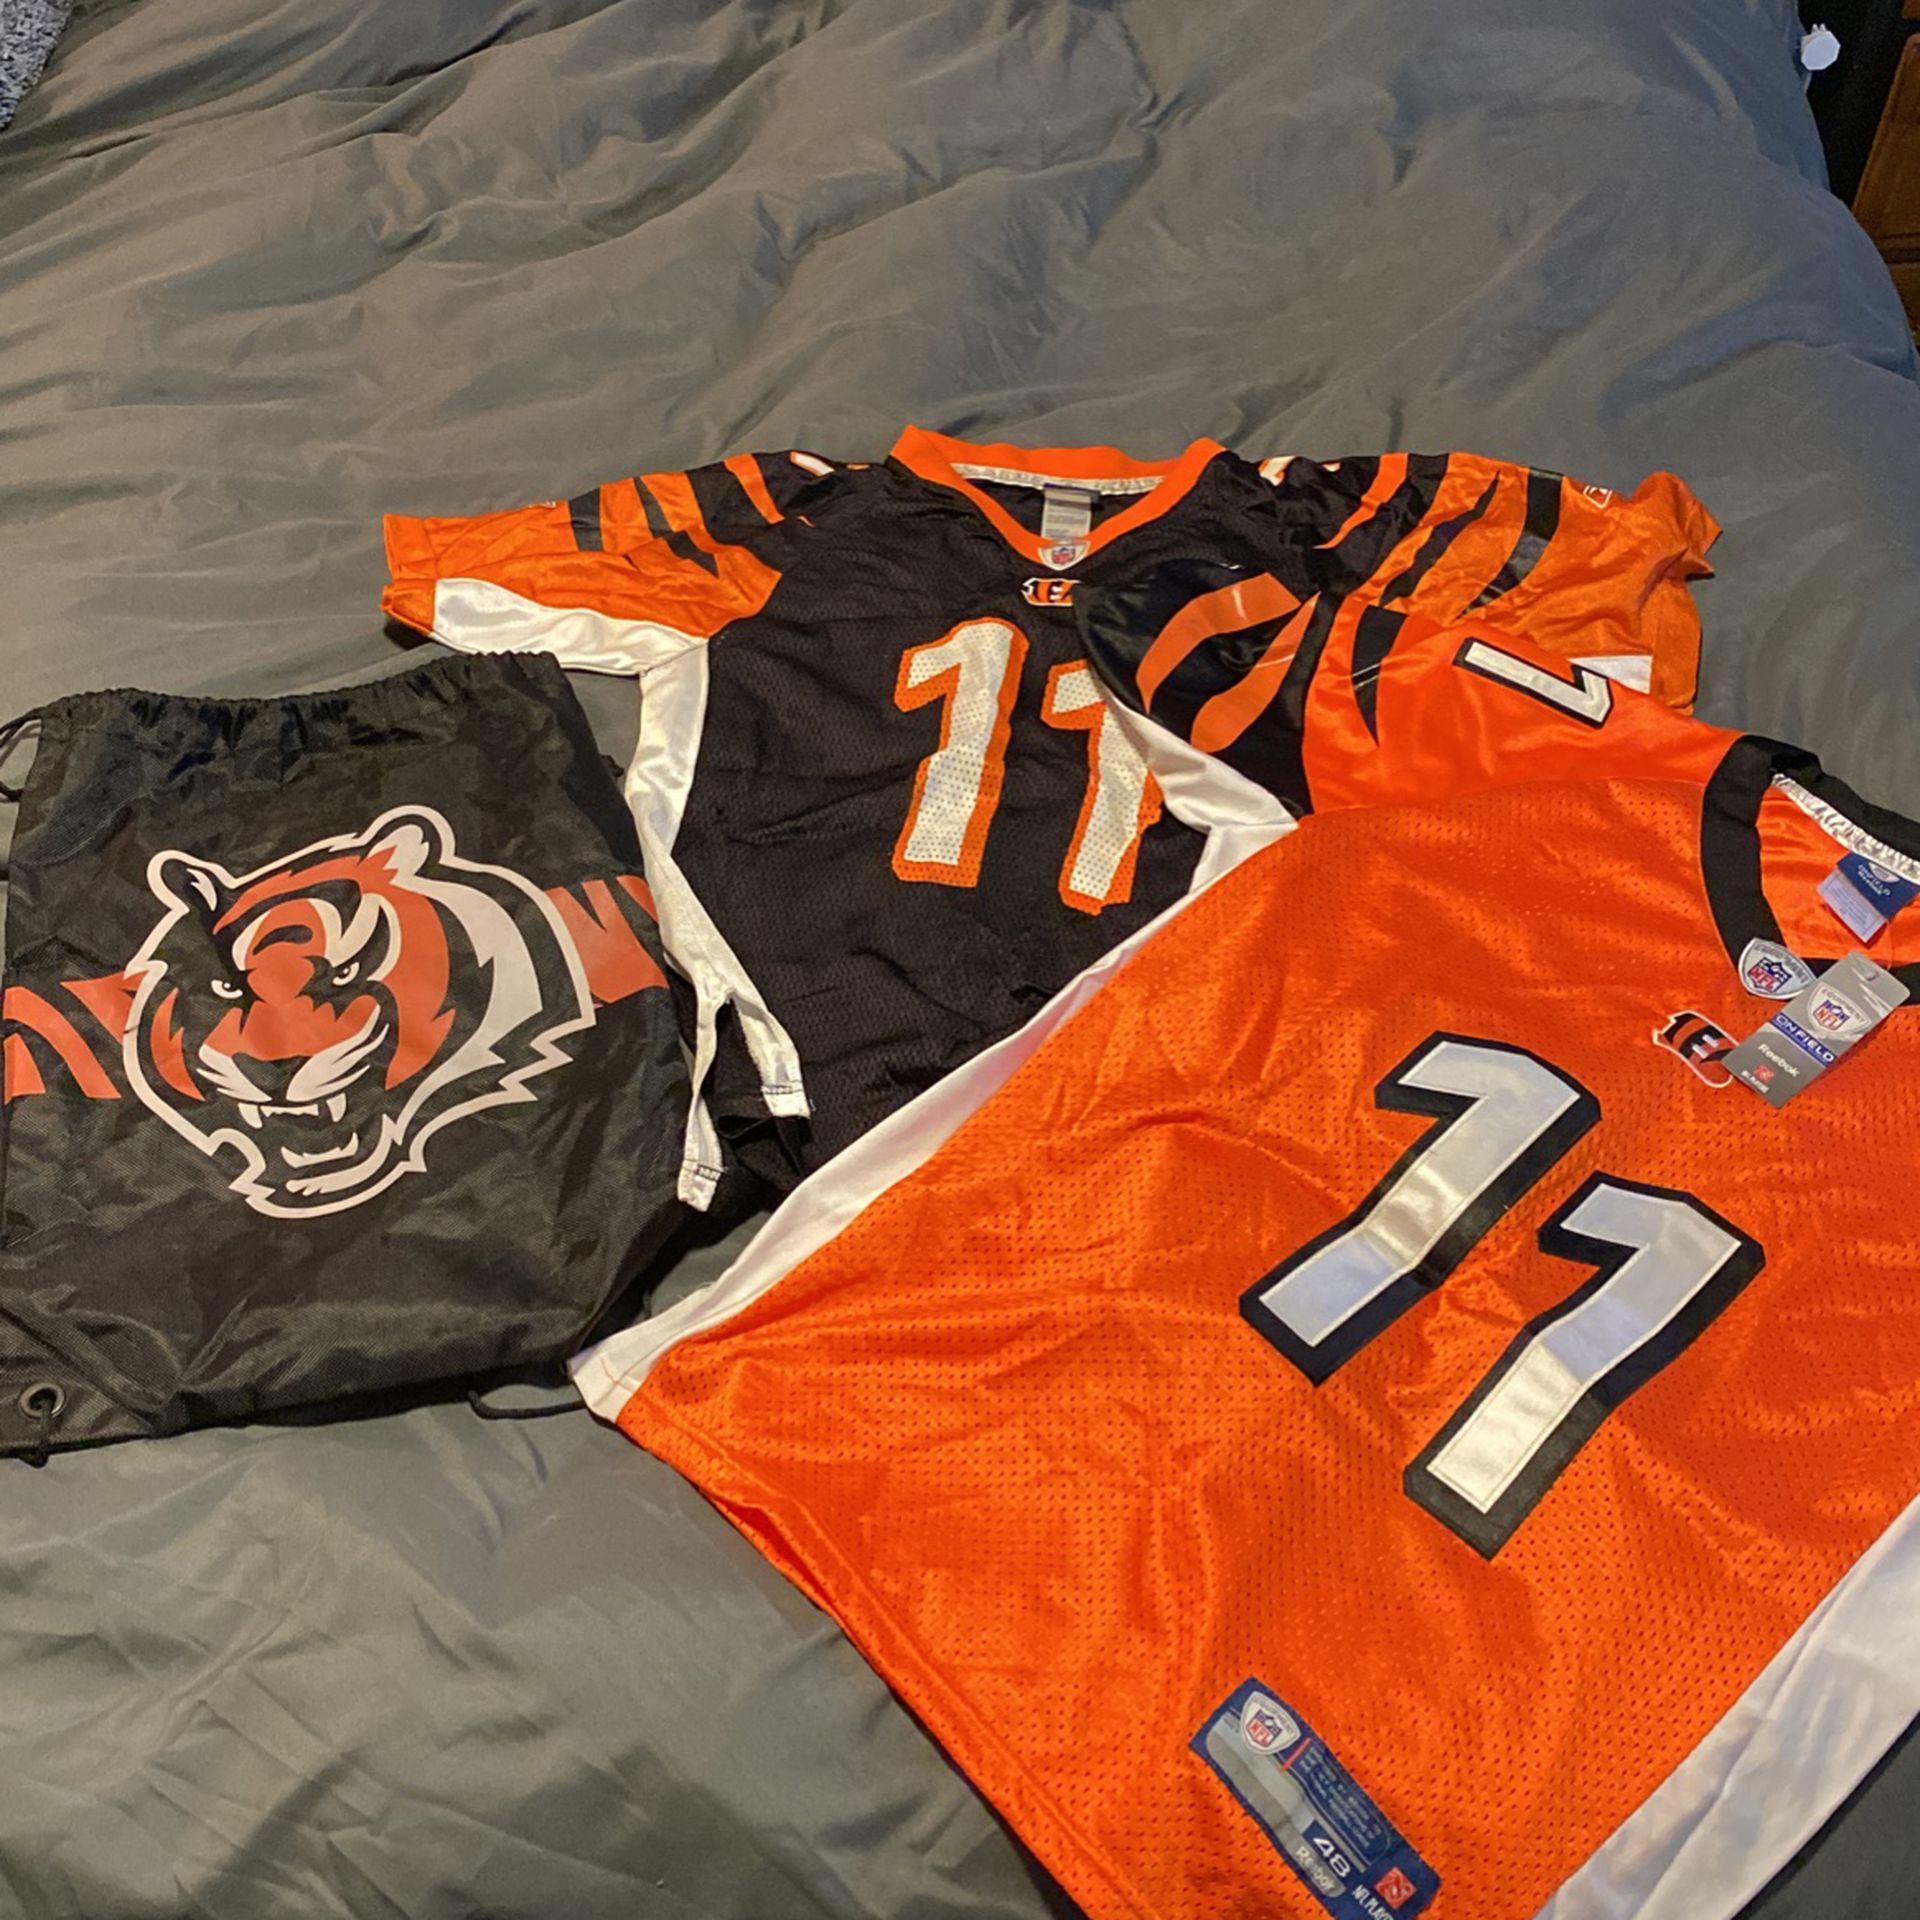 where to buy bengals jerseys near me